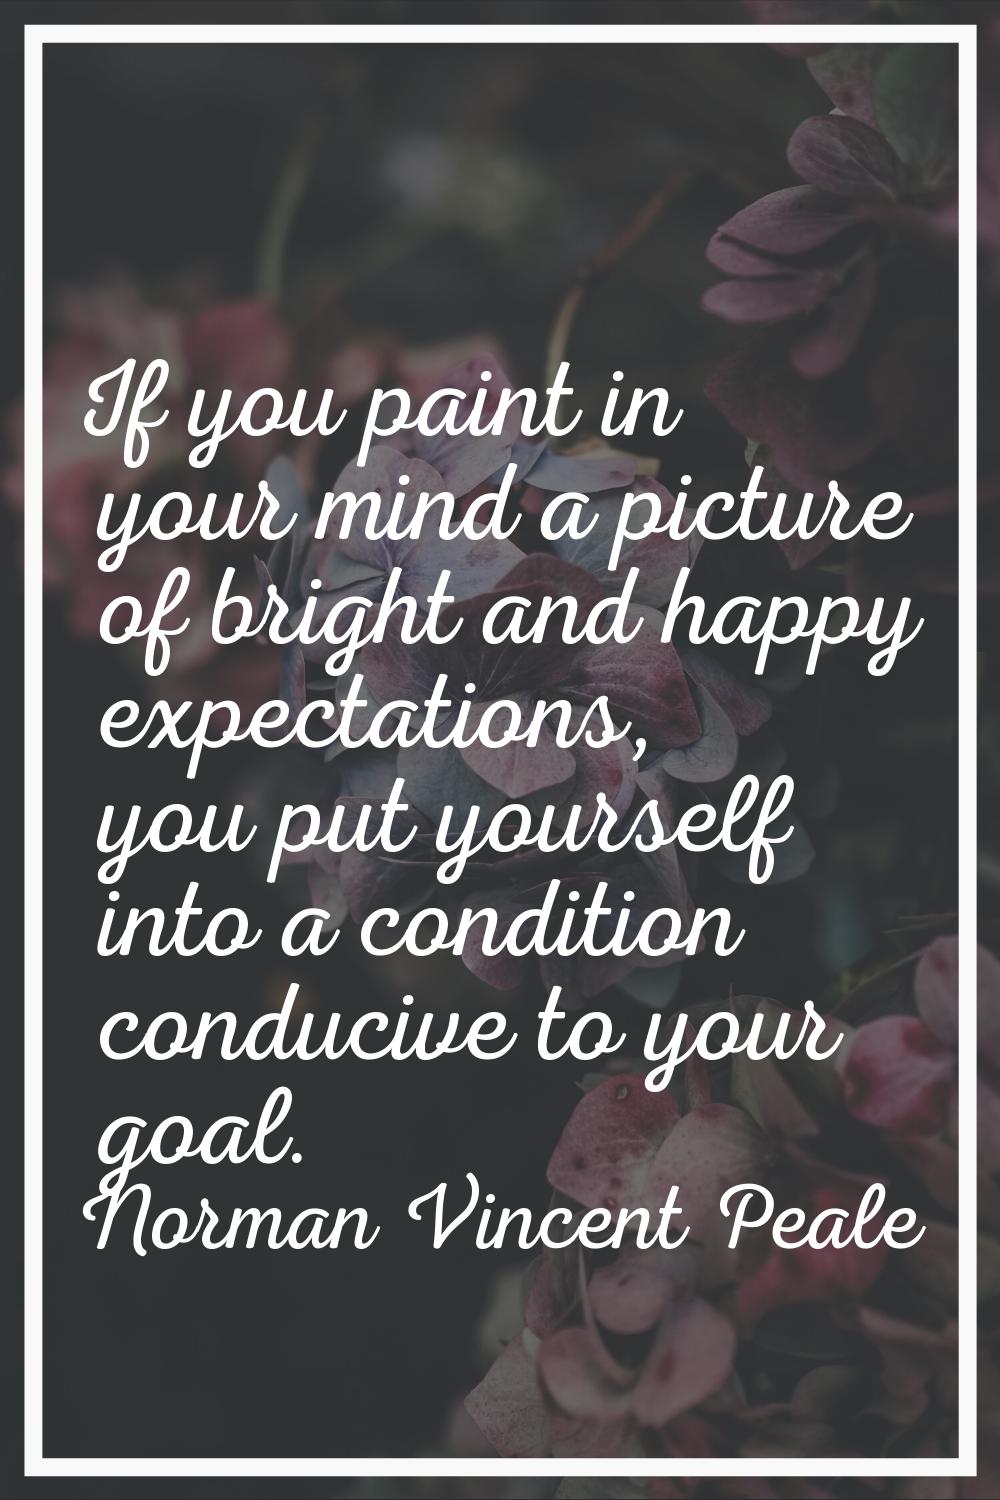 If you paint in your mind a picture of bright and happy expectations, you put yourself into a condi